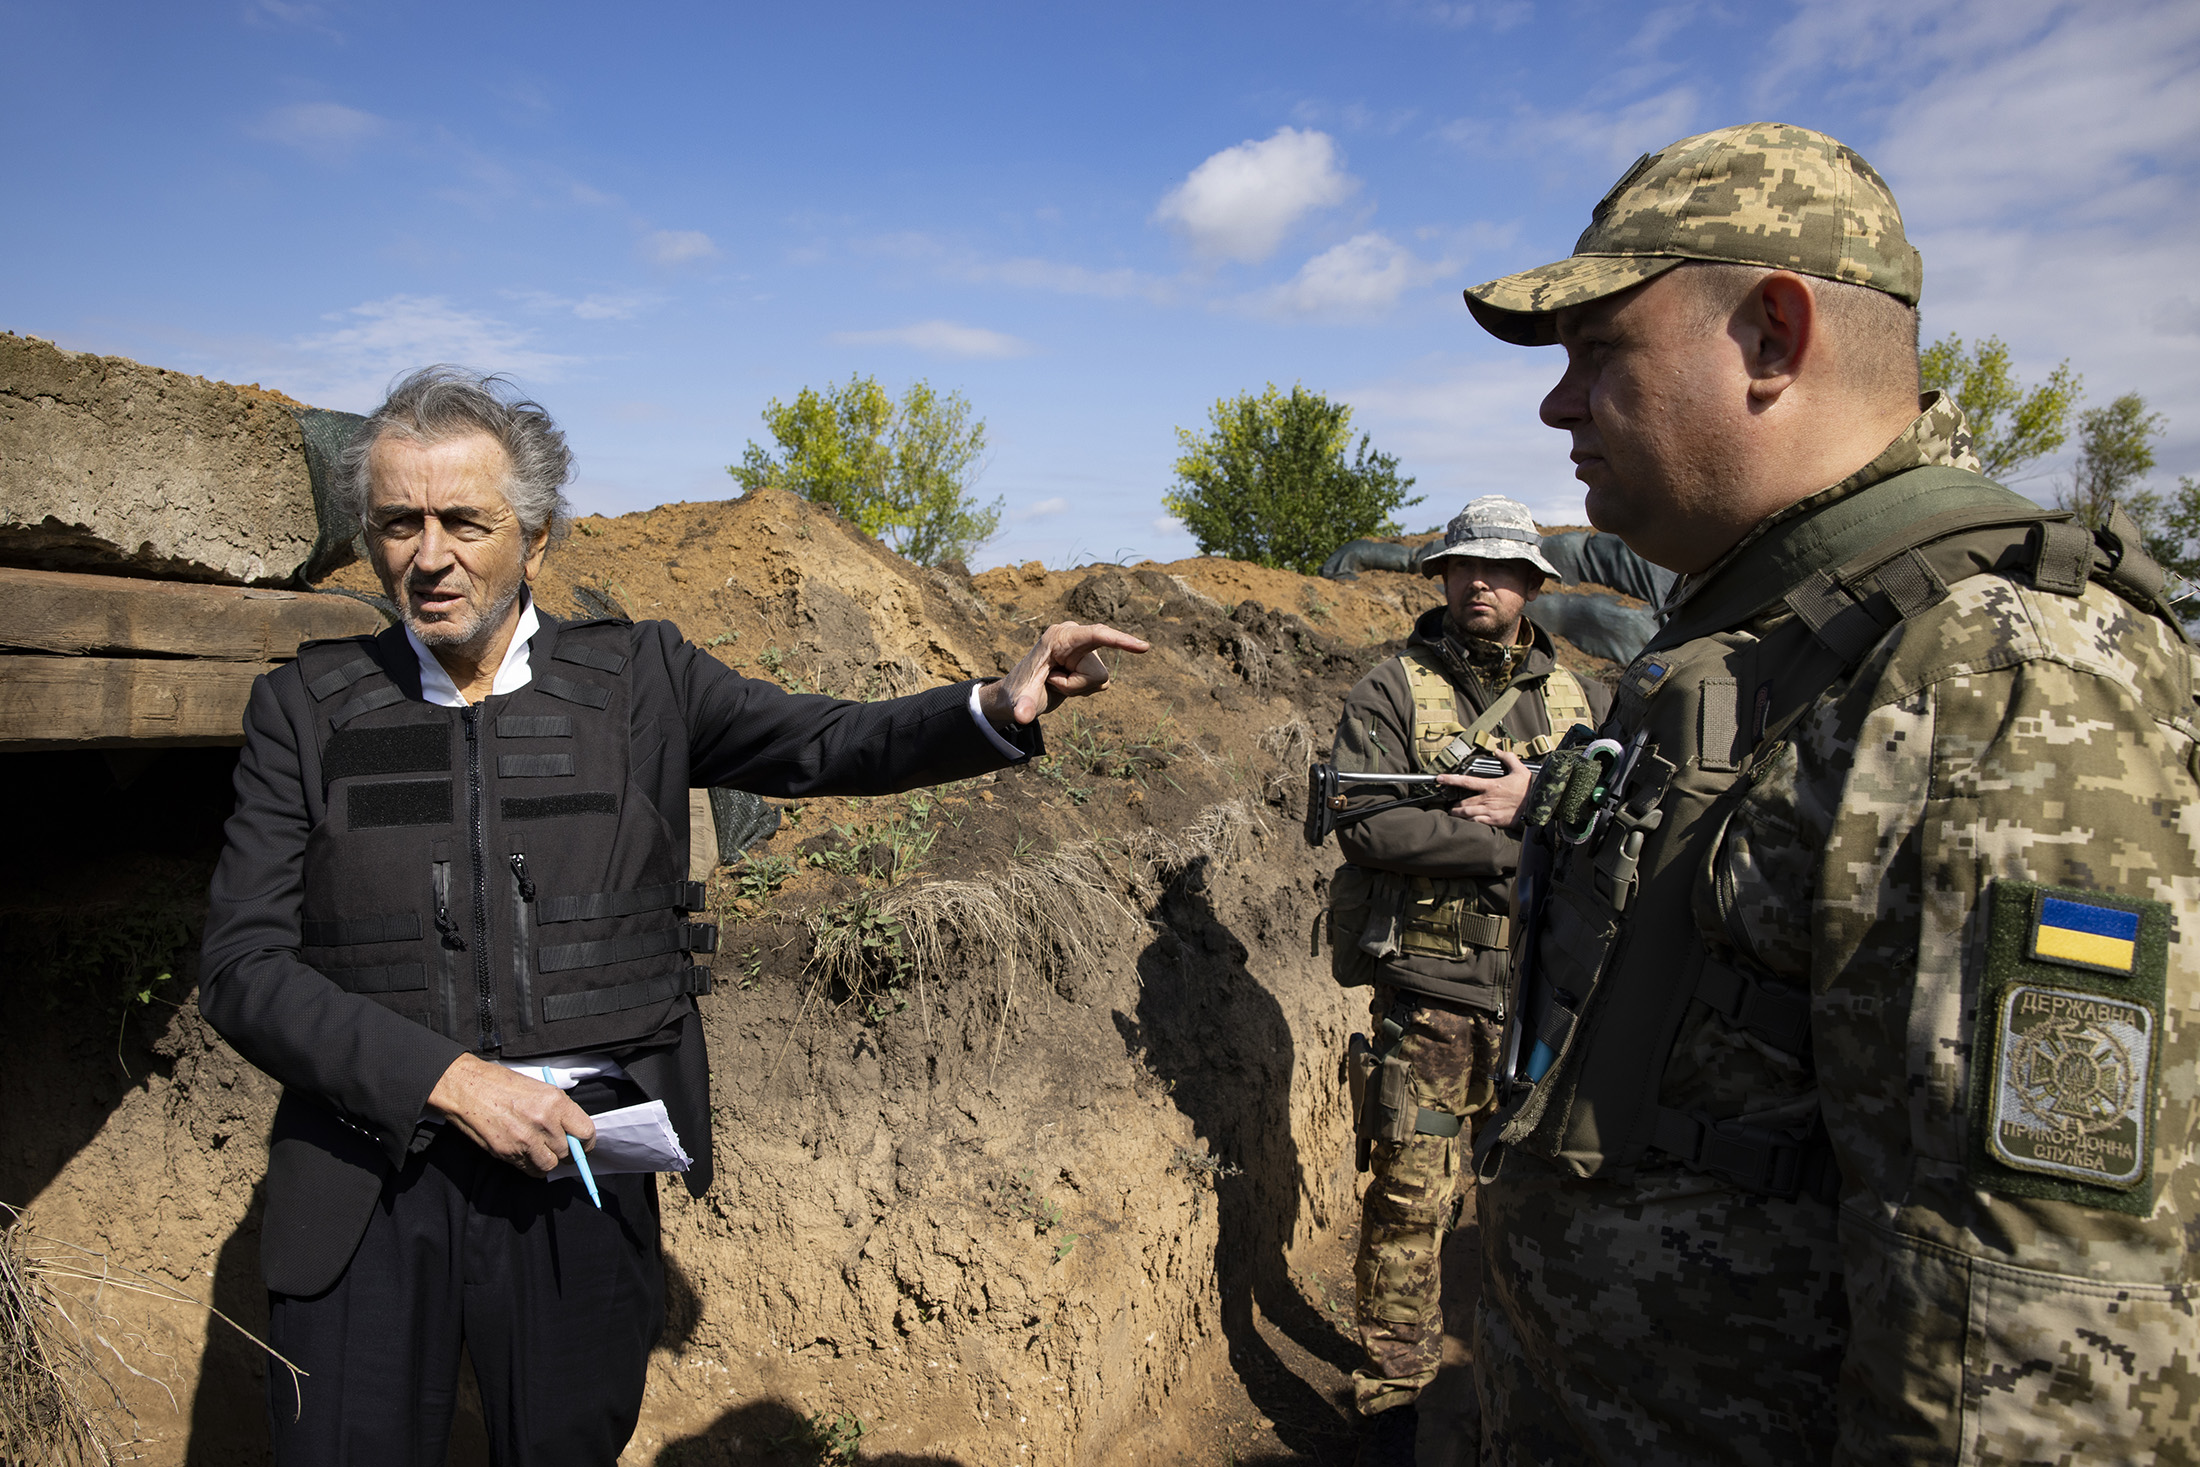 BHL in the trenches of Kherson with the "border control".